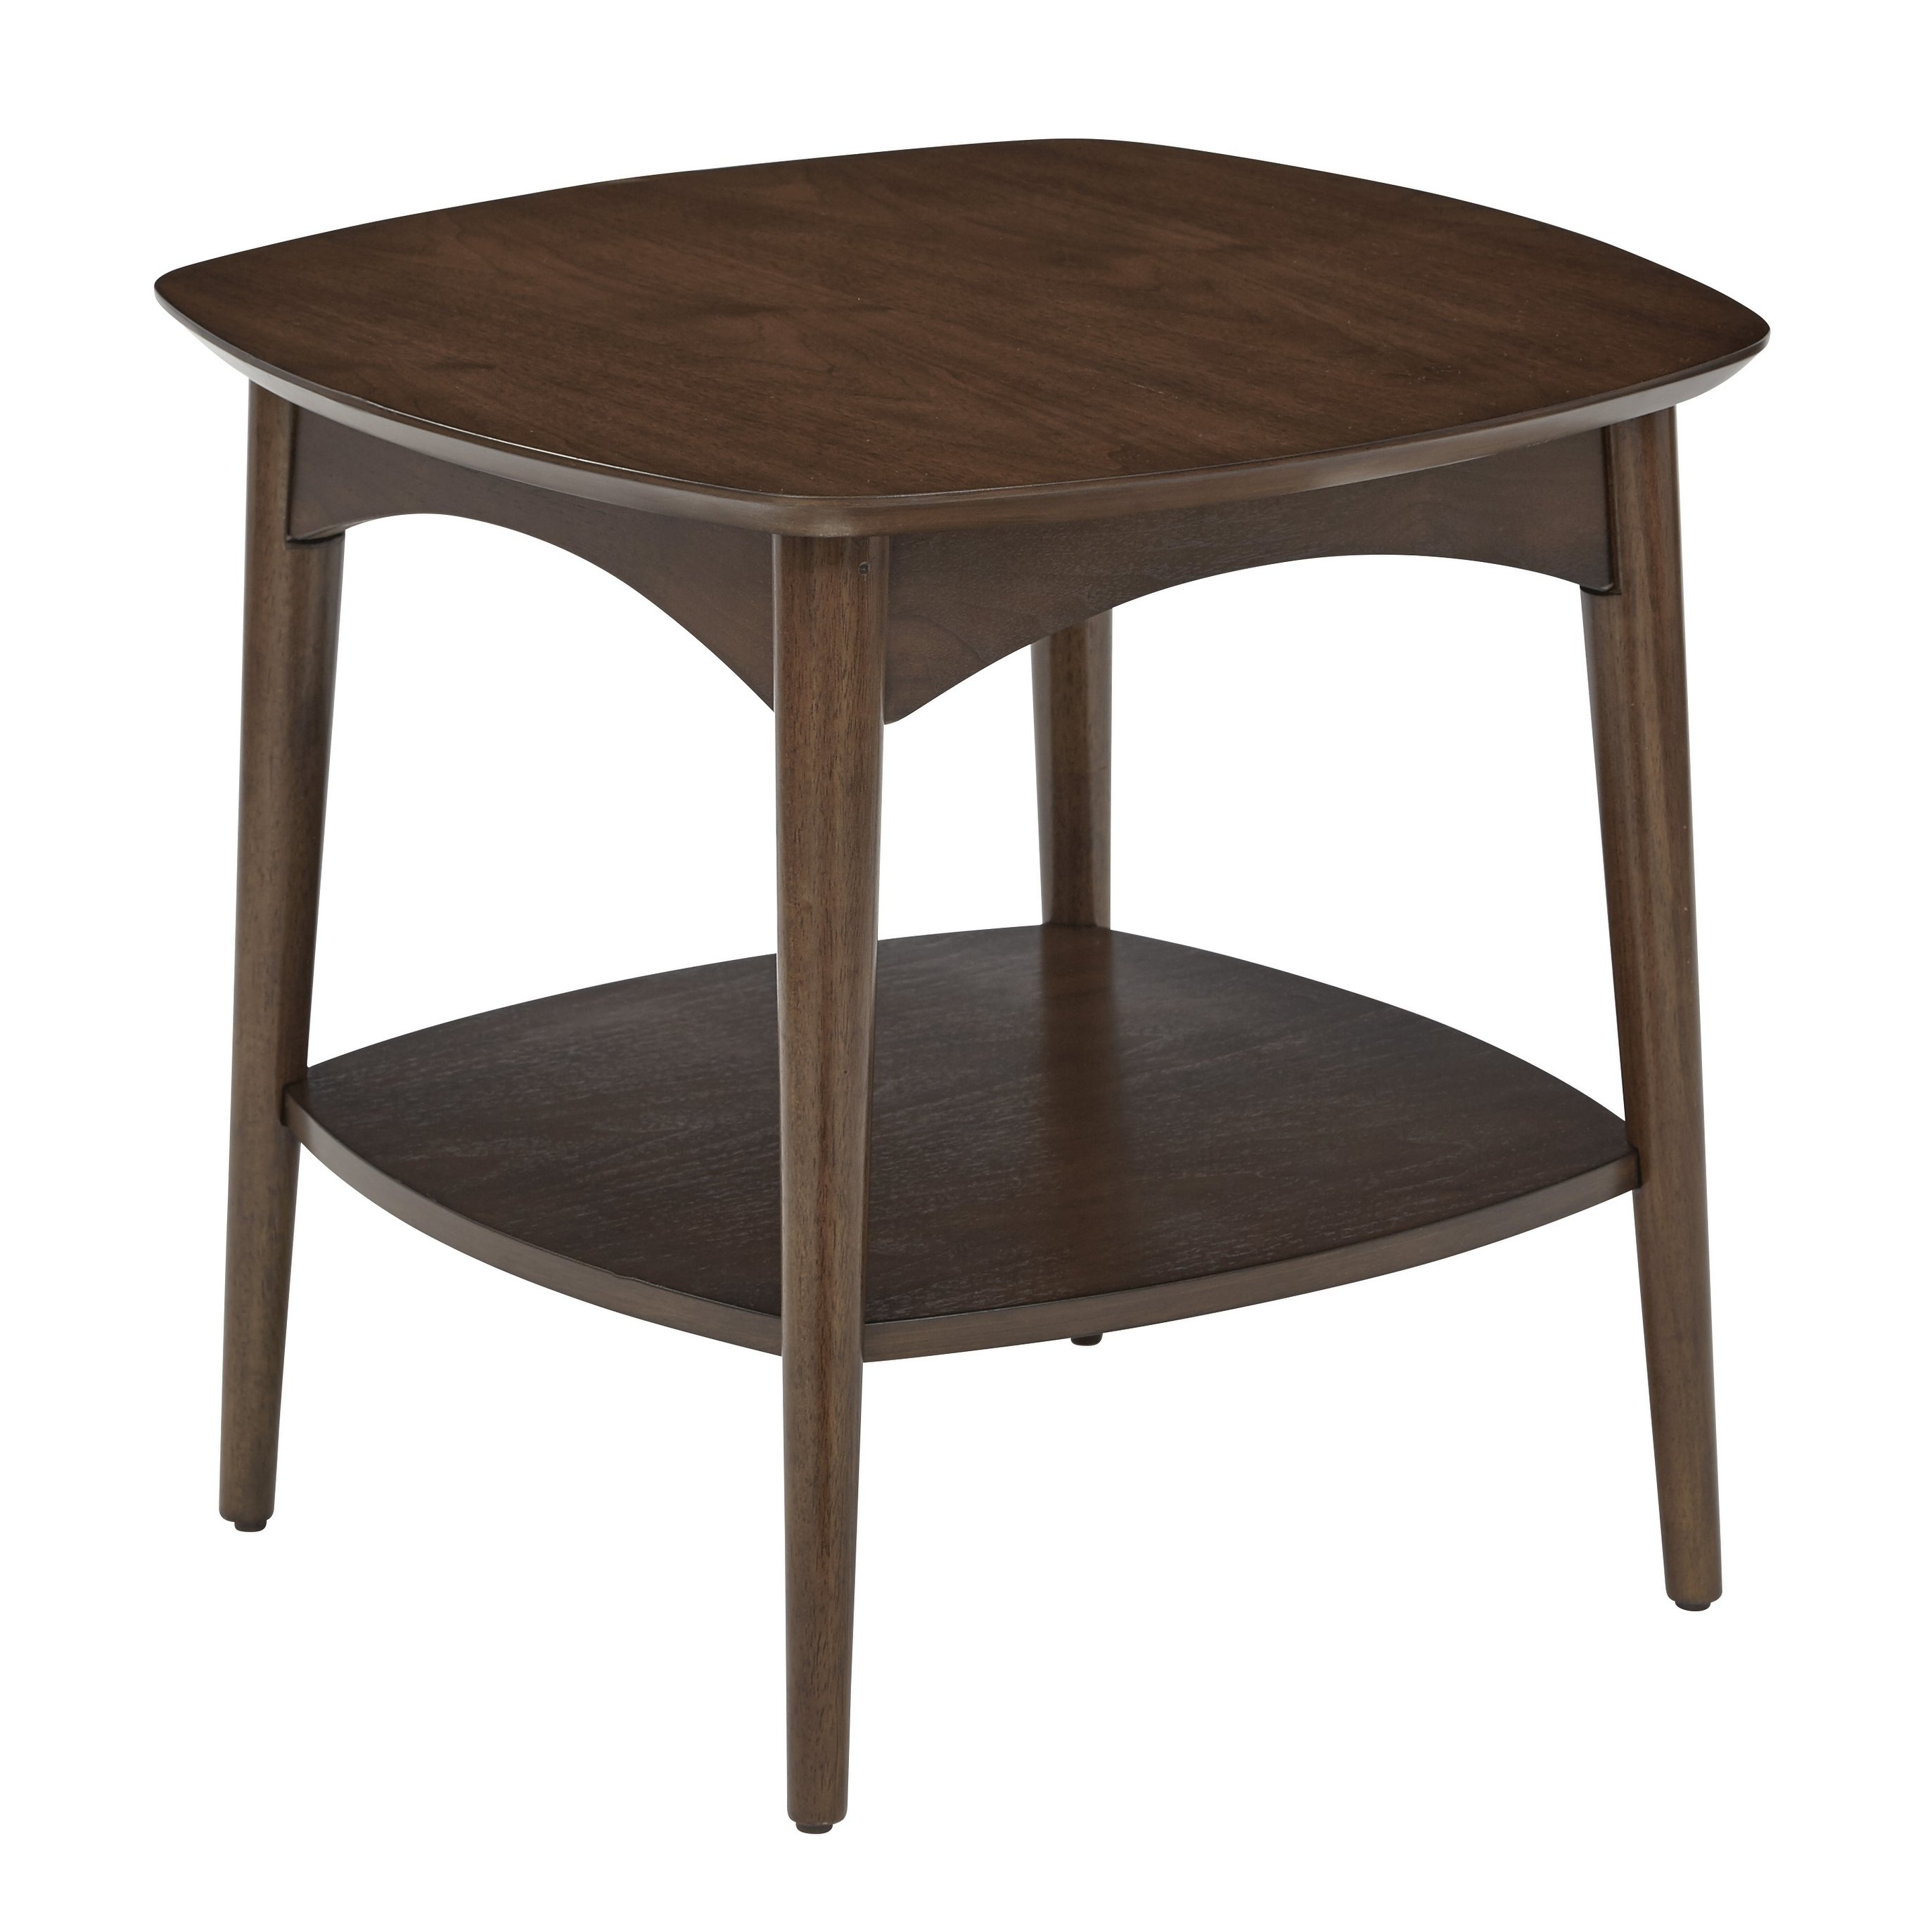 osp home furnishings mid century copenhagen accent table walnut finish free shipping today diy folding round metal bedside oriental furniture lamps outdoor coffee ideas dining mat